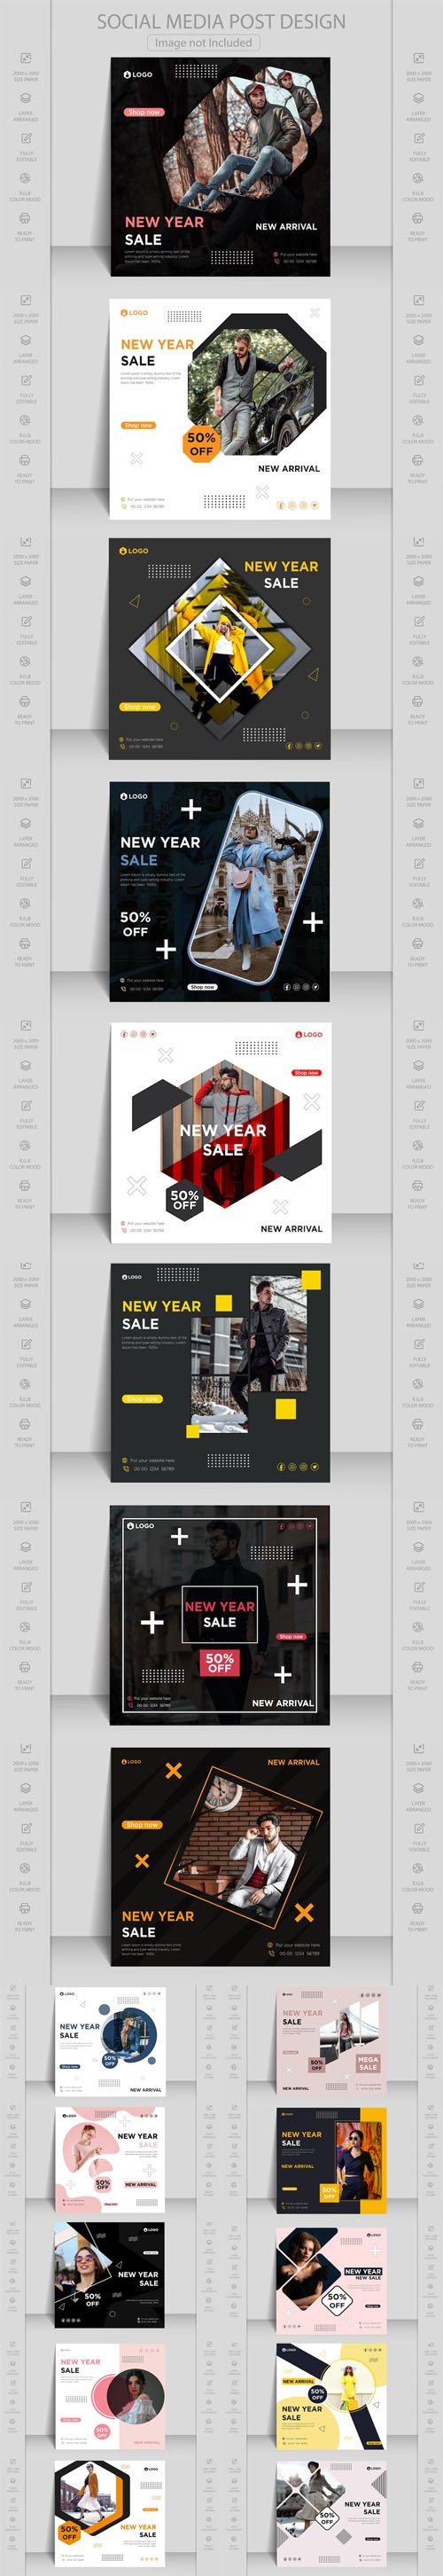 Winter & New Year Sales - 18 Square Social Media Posts - Vector Templates